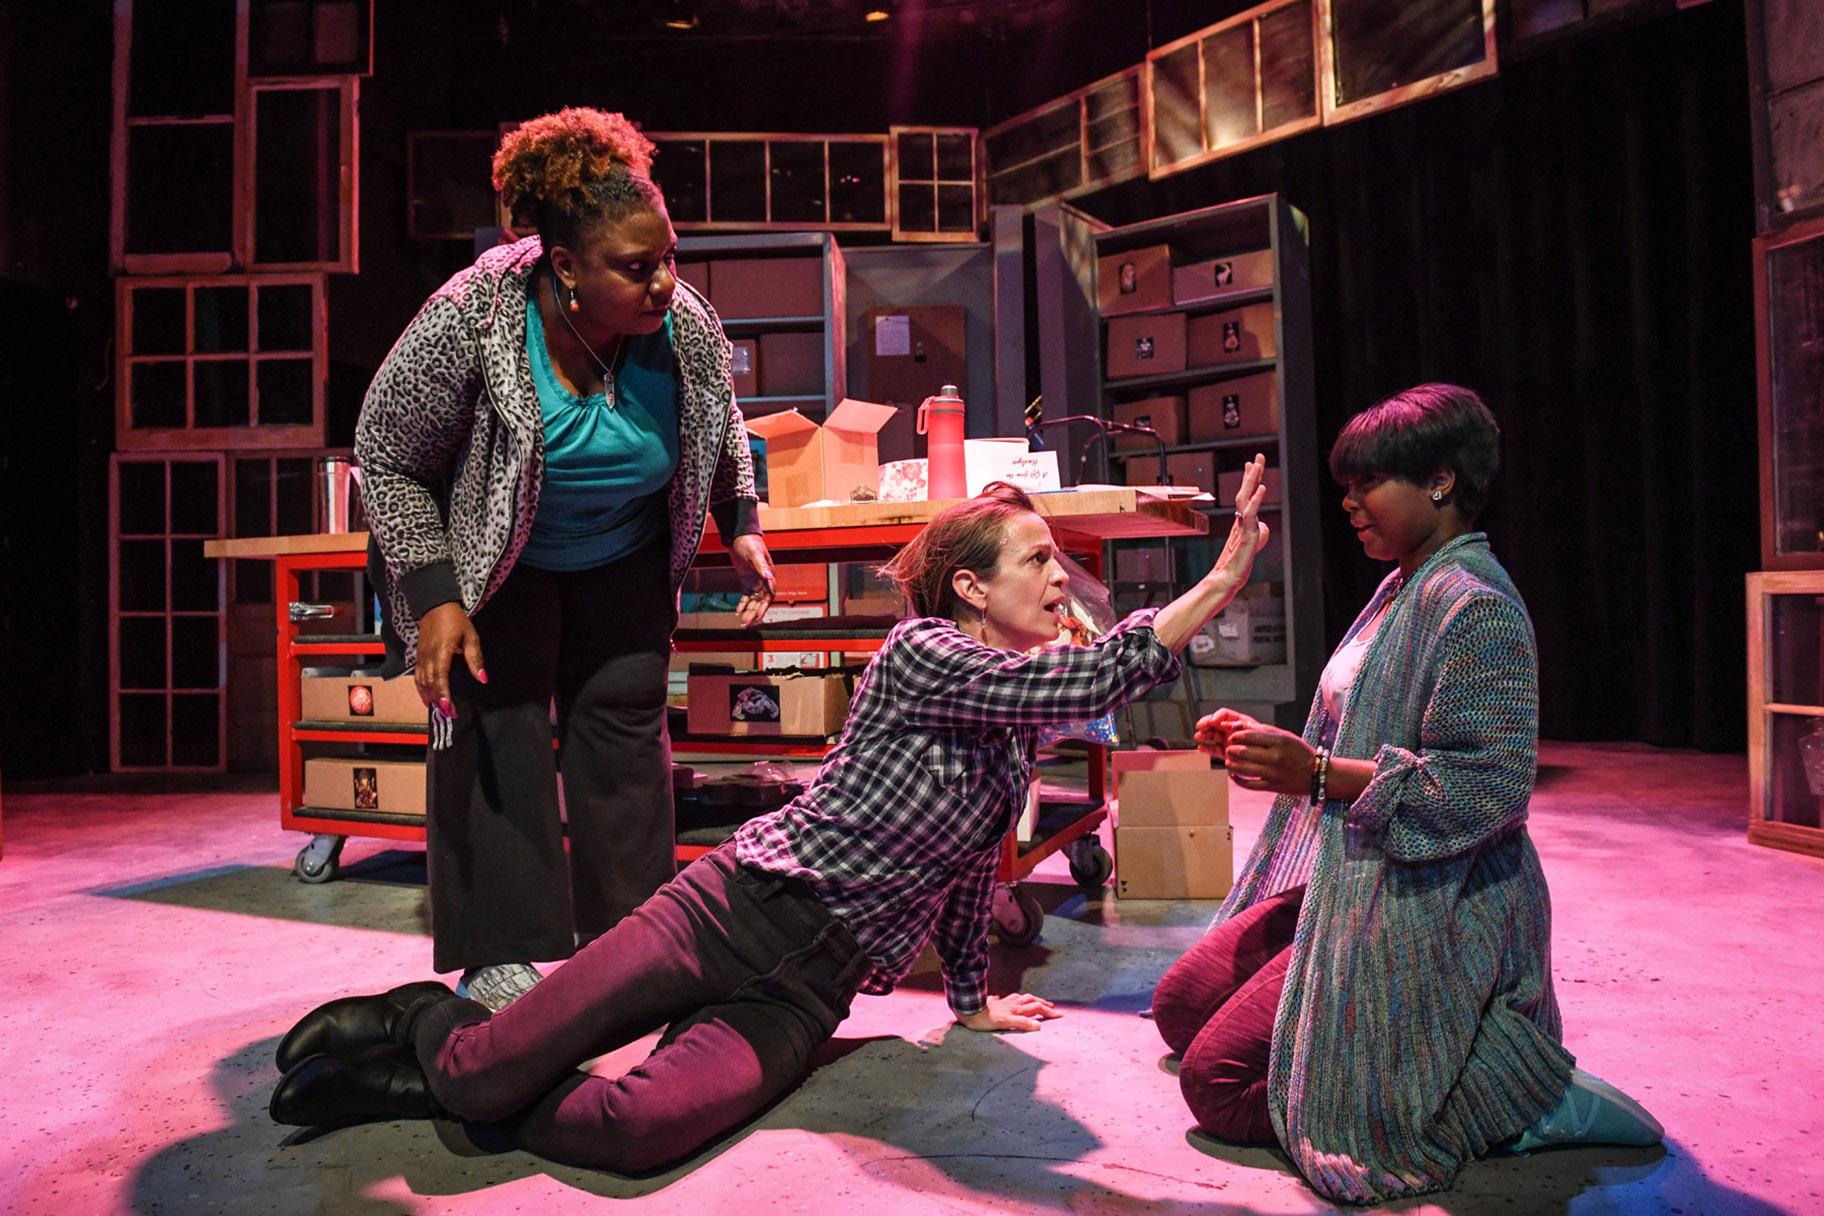 From left: Deanna Reed-Foster, Rebecca Jordan and Demetra Dee in “Be Here Now.” (Photo by Evan Hanover)